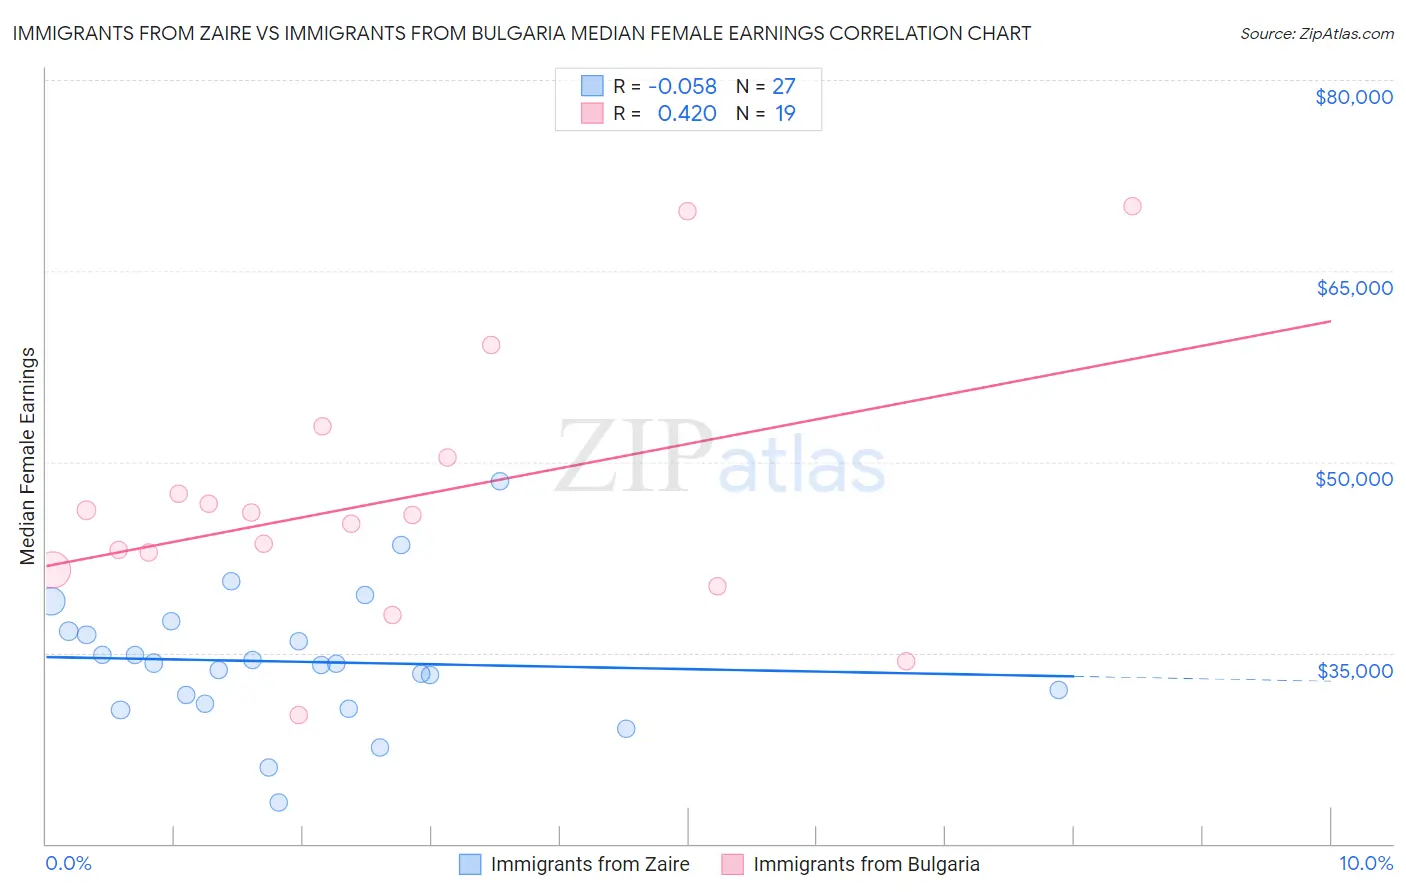 Immigrants from Zaire vs Immigrants from Bulgaria Median Female Earnings